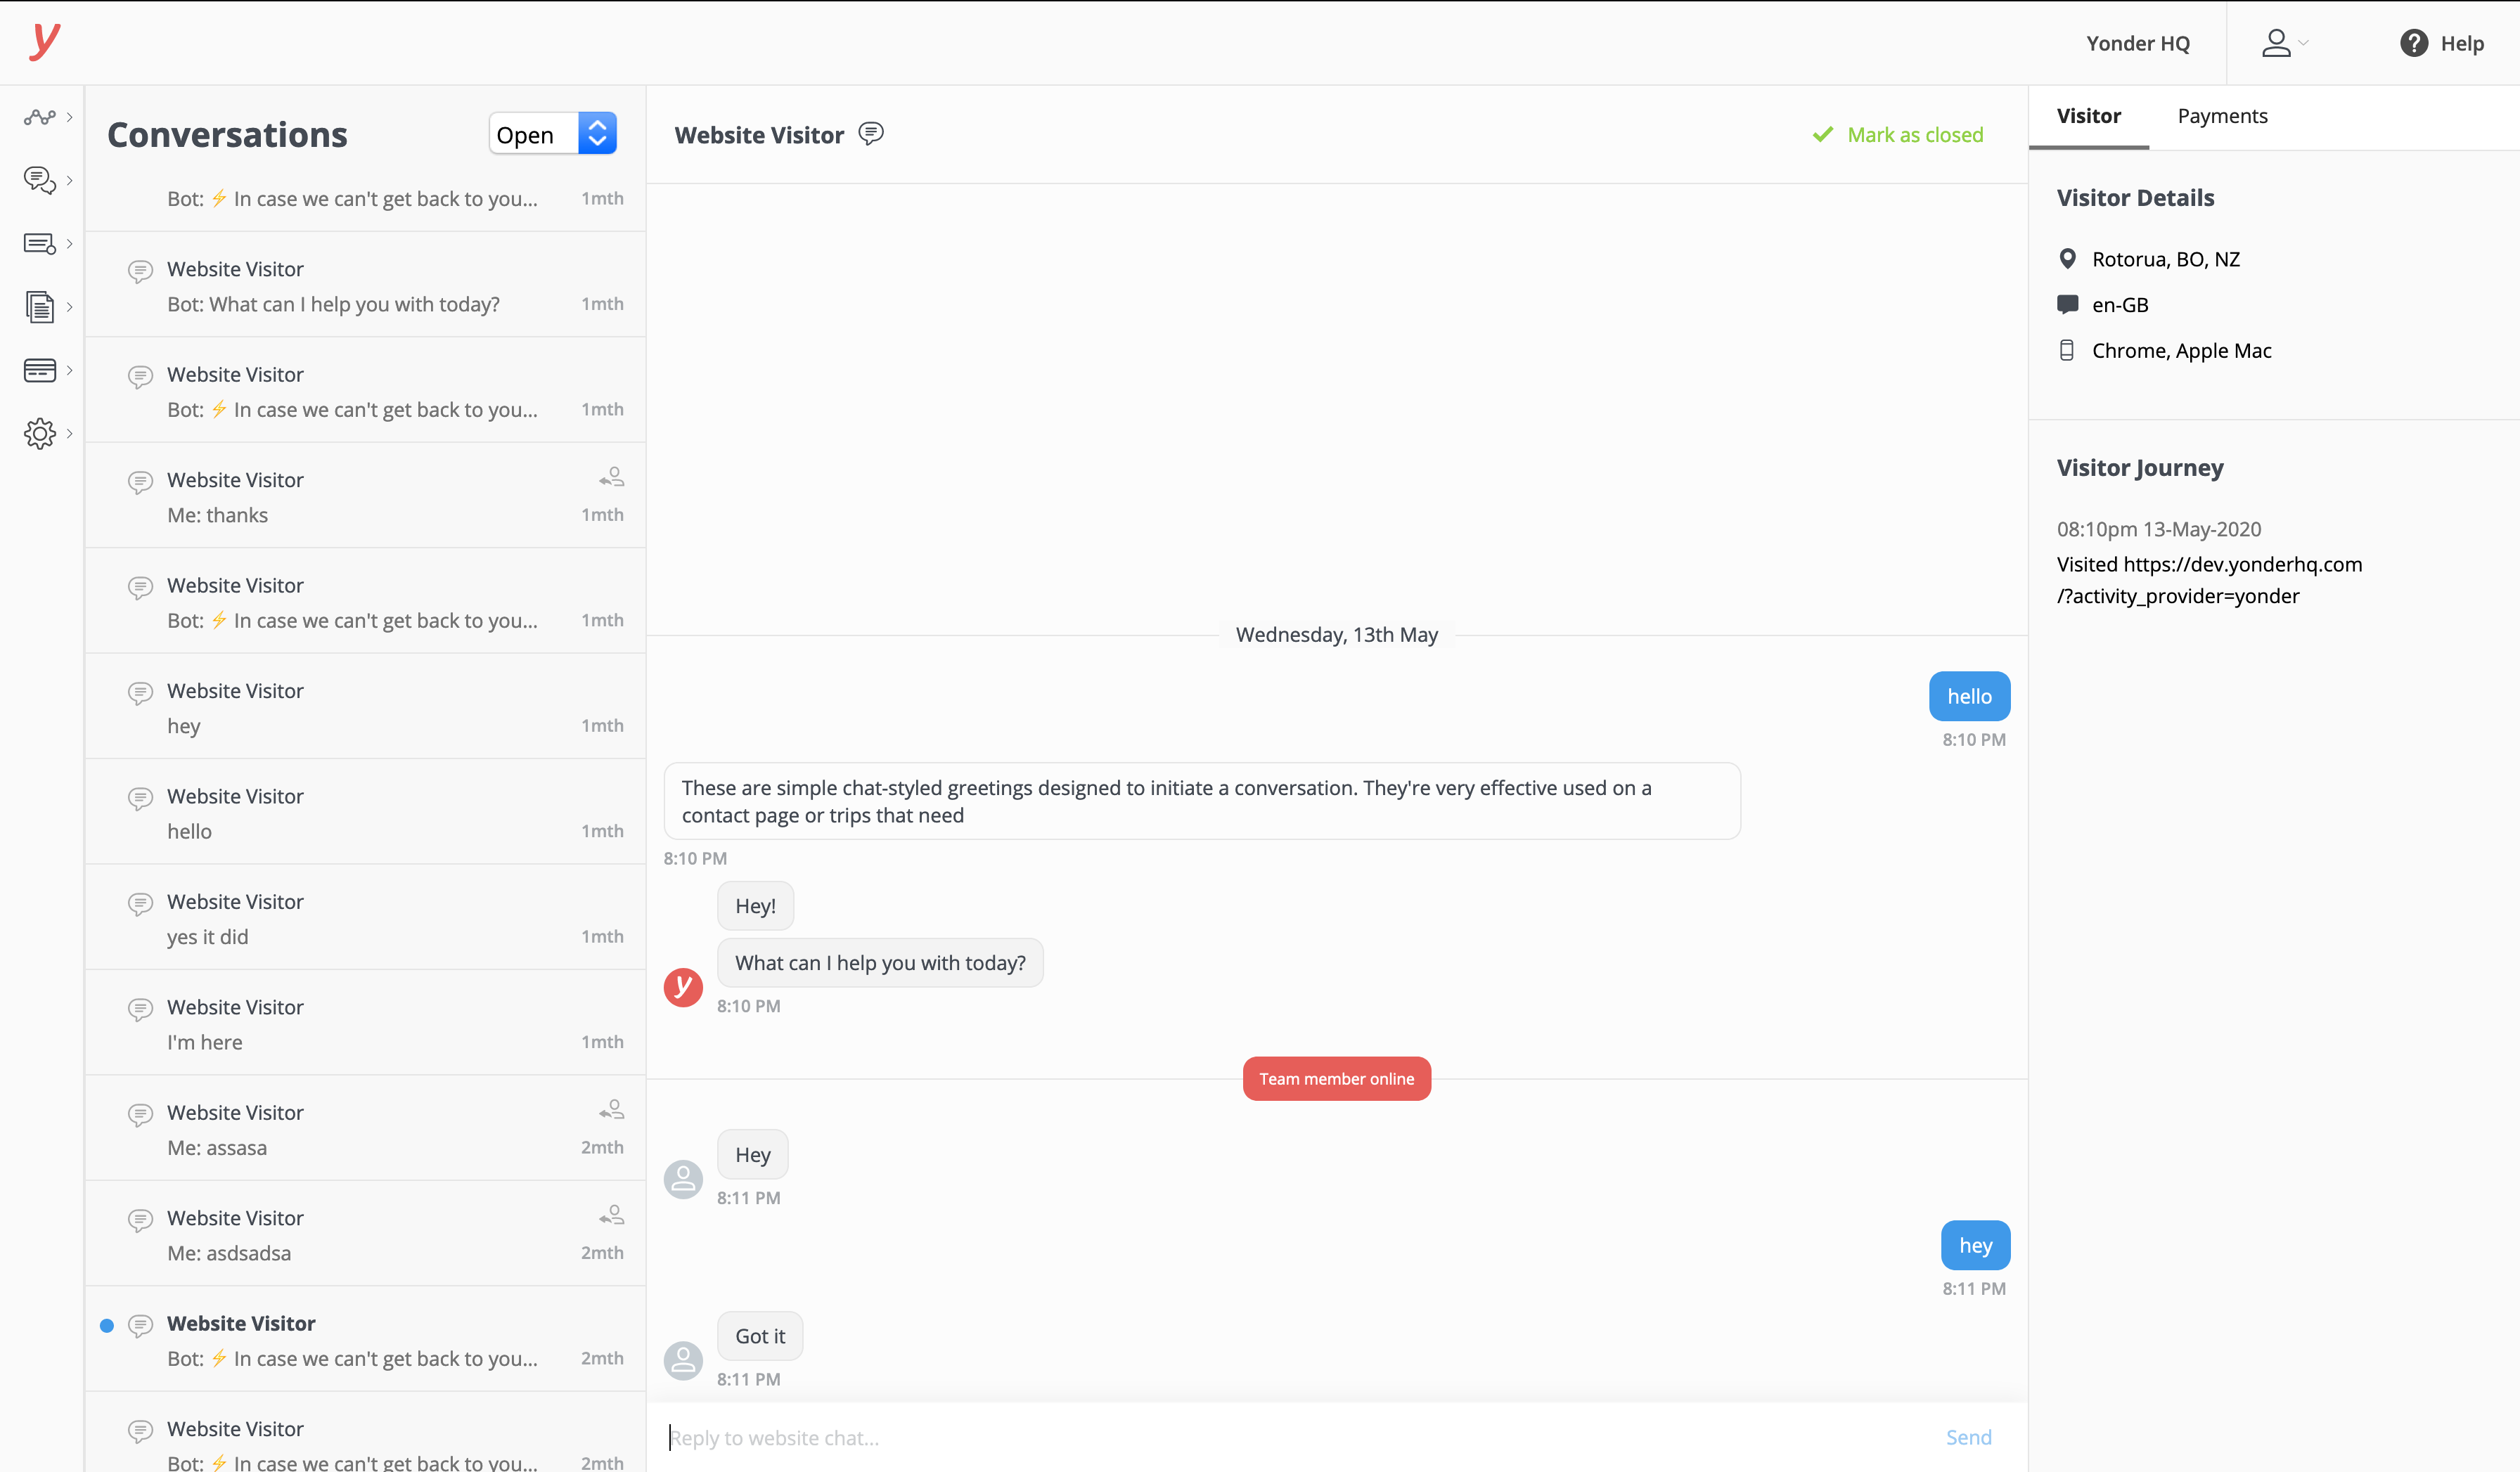 A screenshot of the YonderHQ realtime chat interface